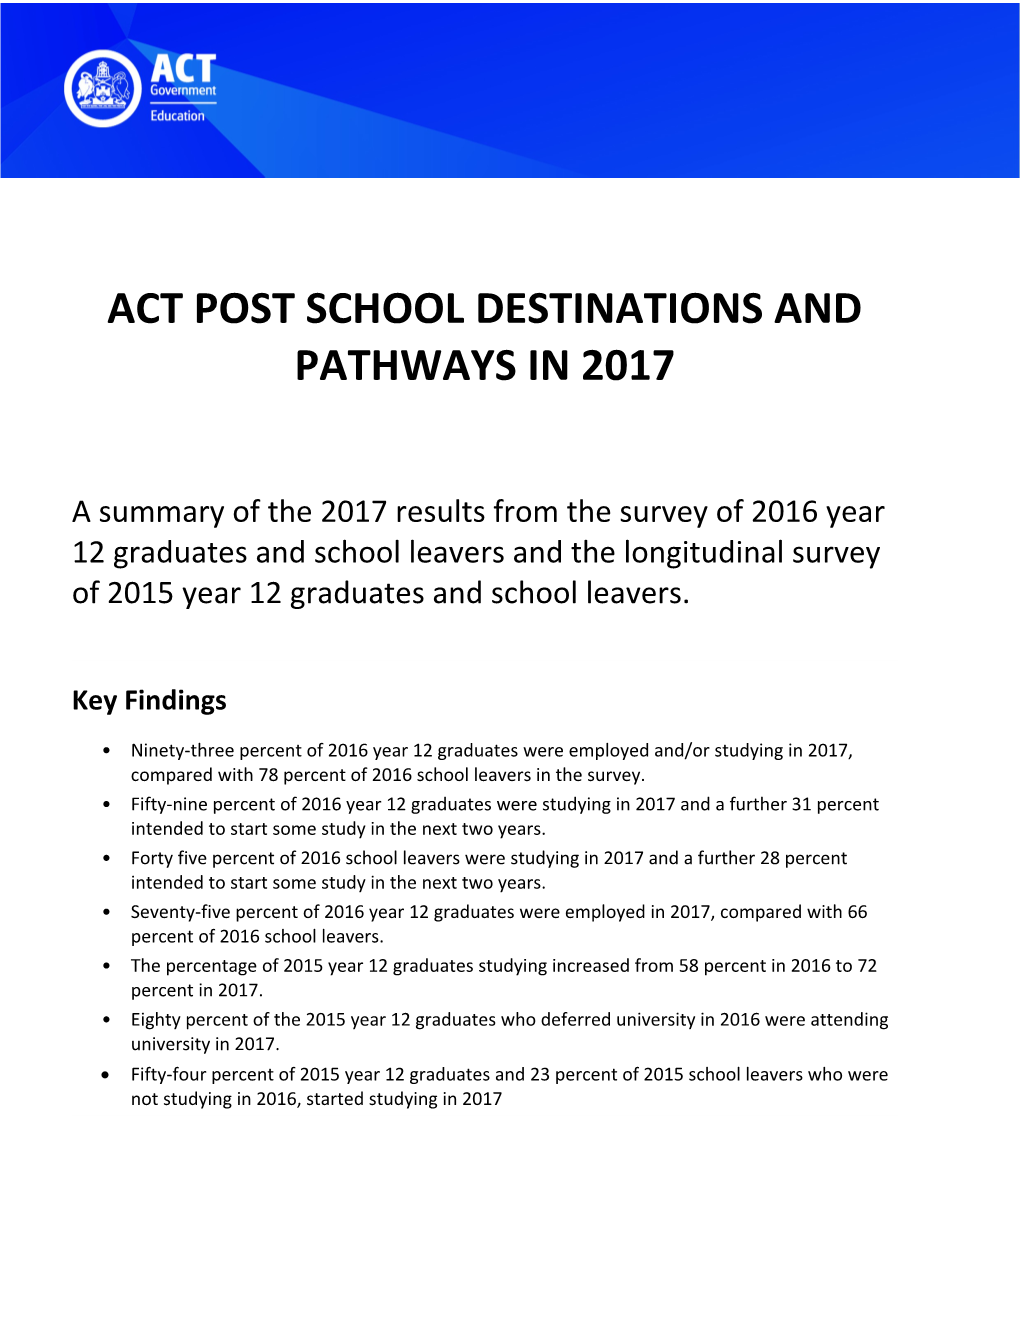 Act Post School Destinations and Pathways in 2017